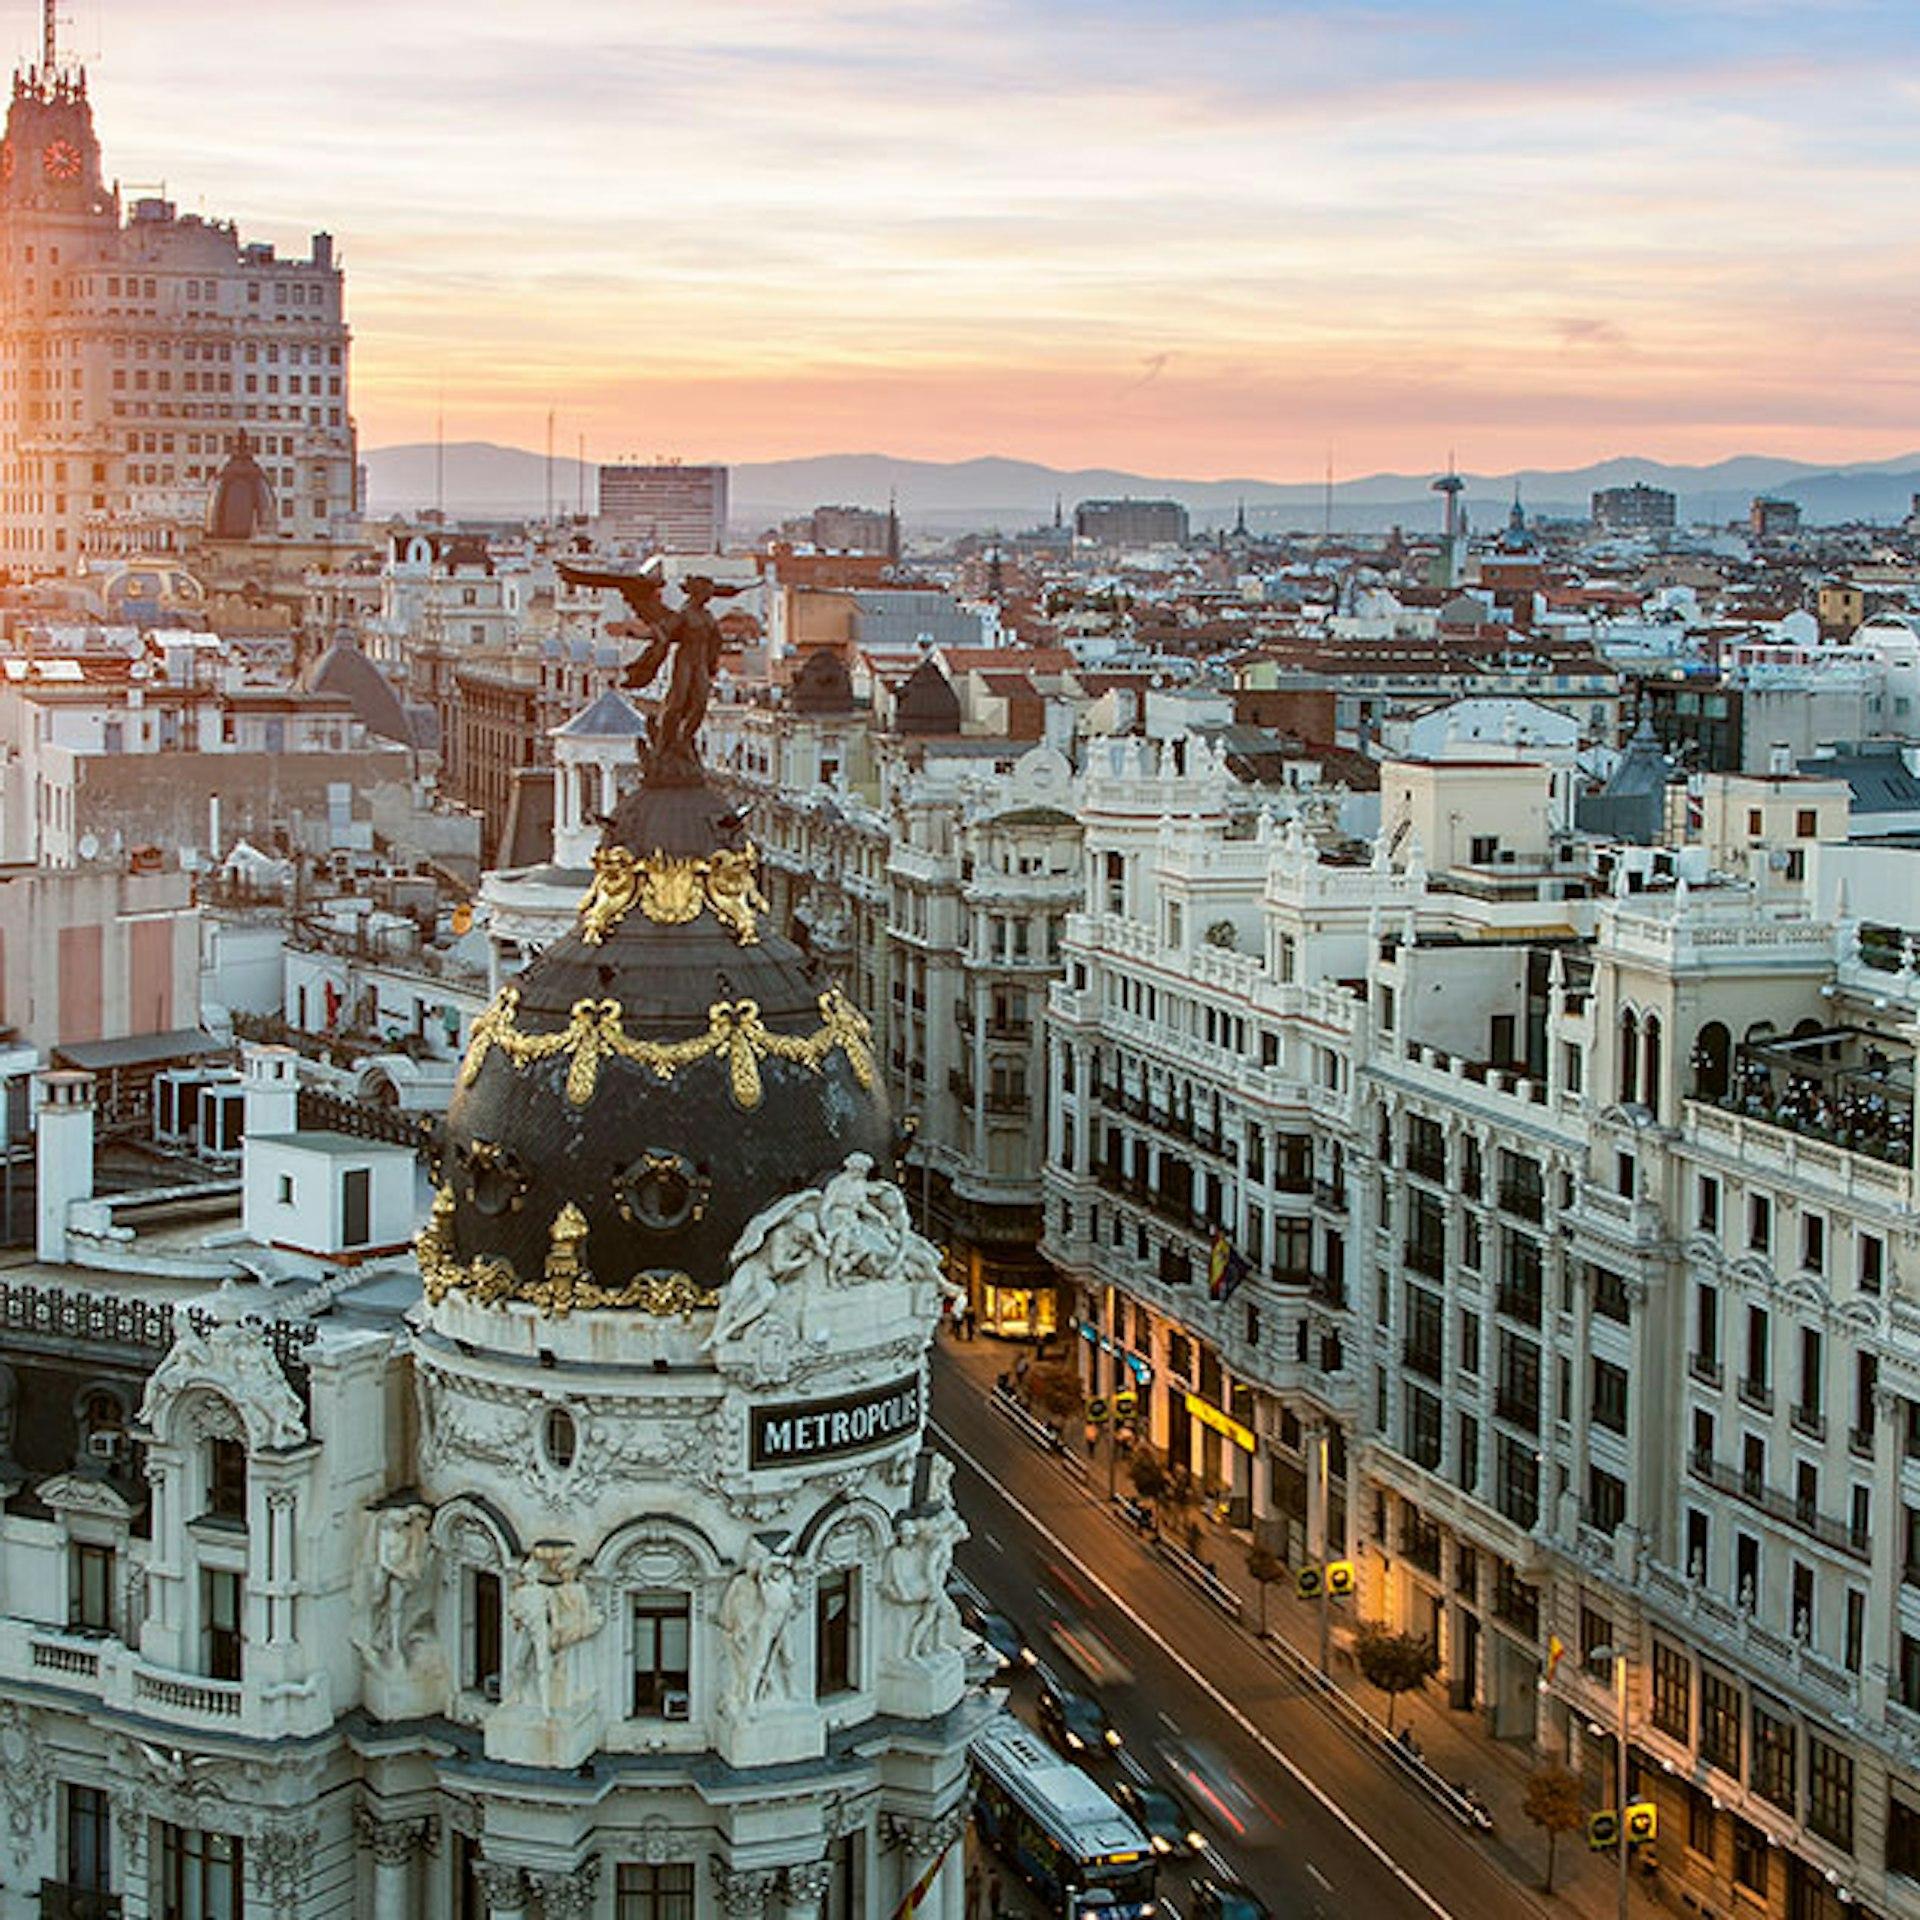 Get the latest news and updates on e-invoicing, e-ordering, e-archiving and indirect tax regulatory requirements for Spain.